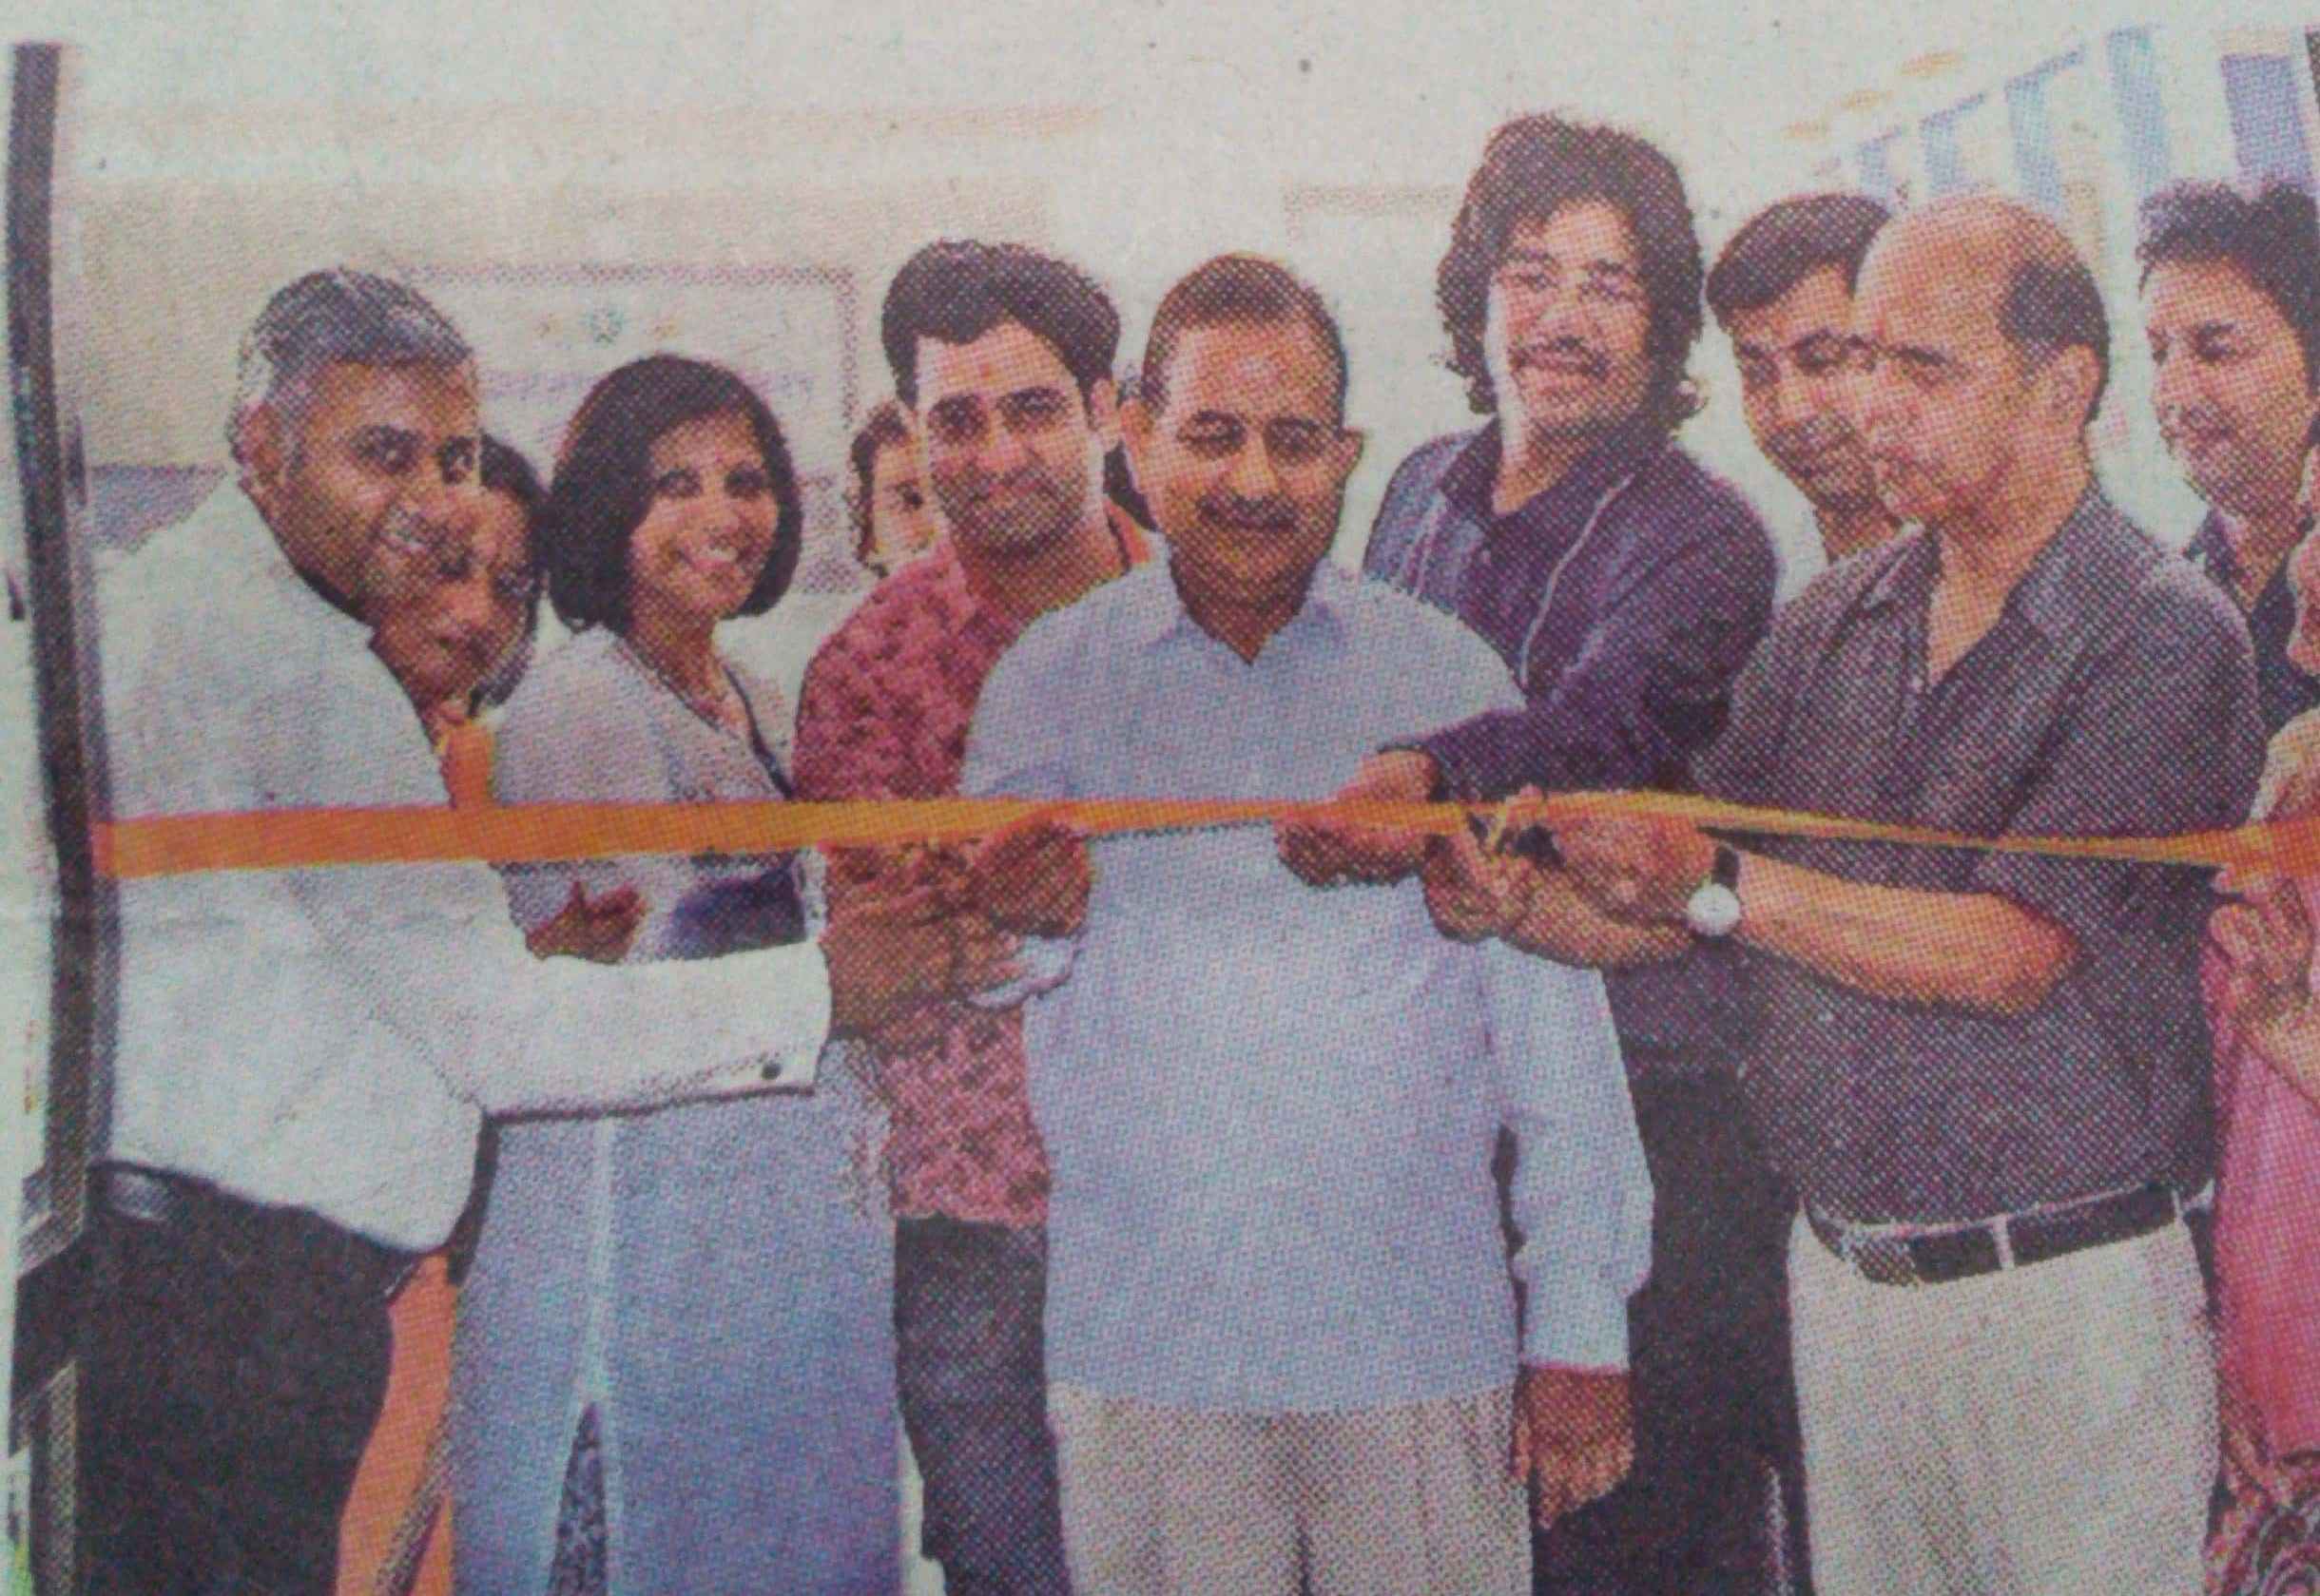 MDS Music College inaugurated on Friday